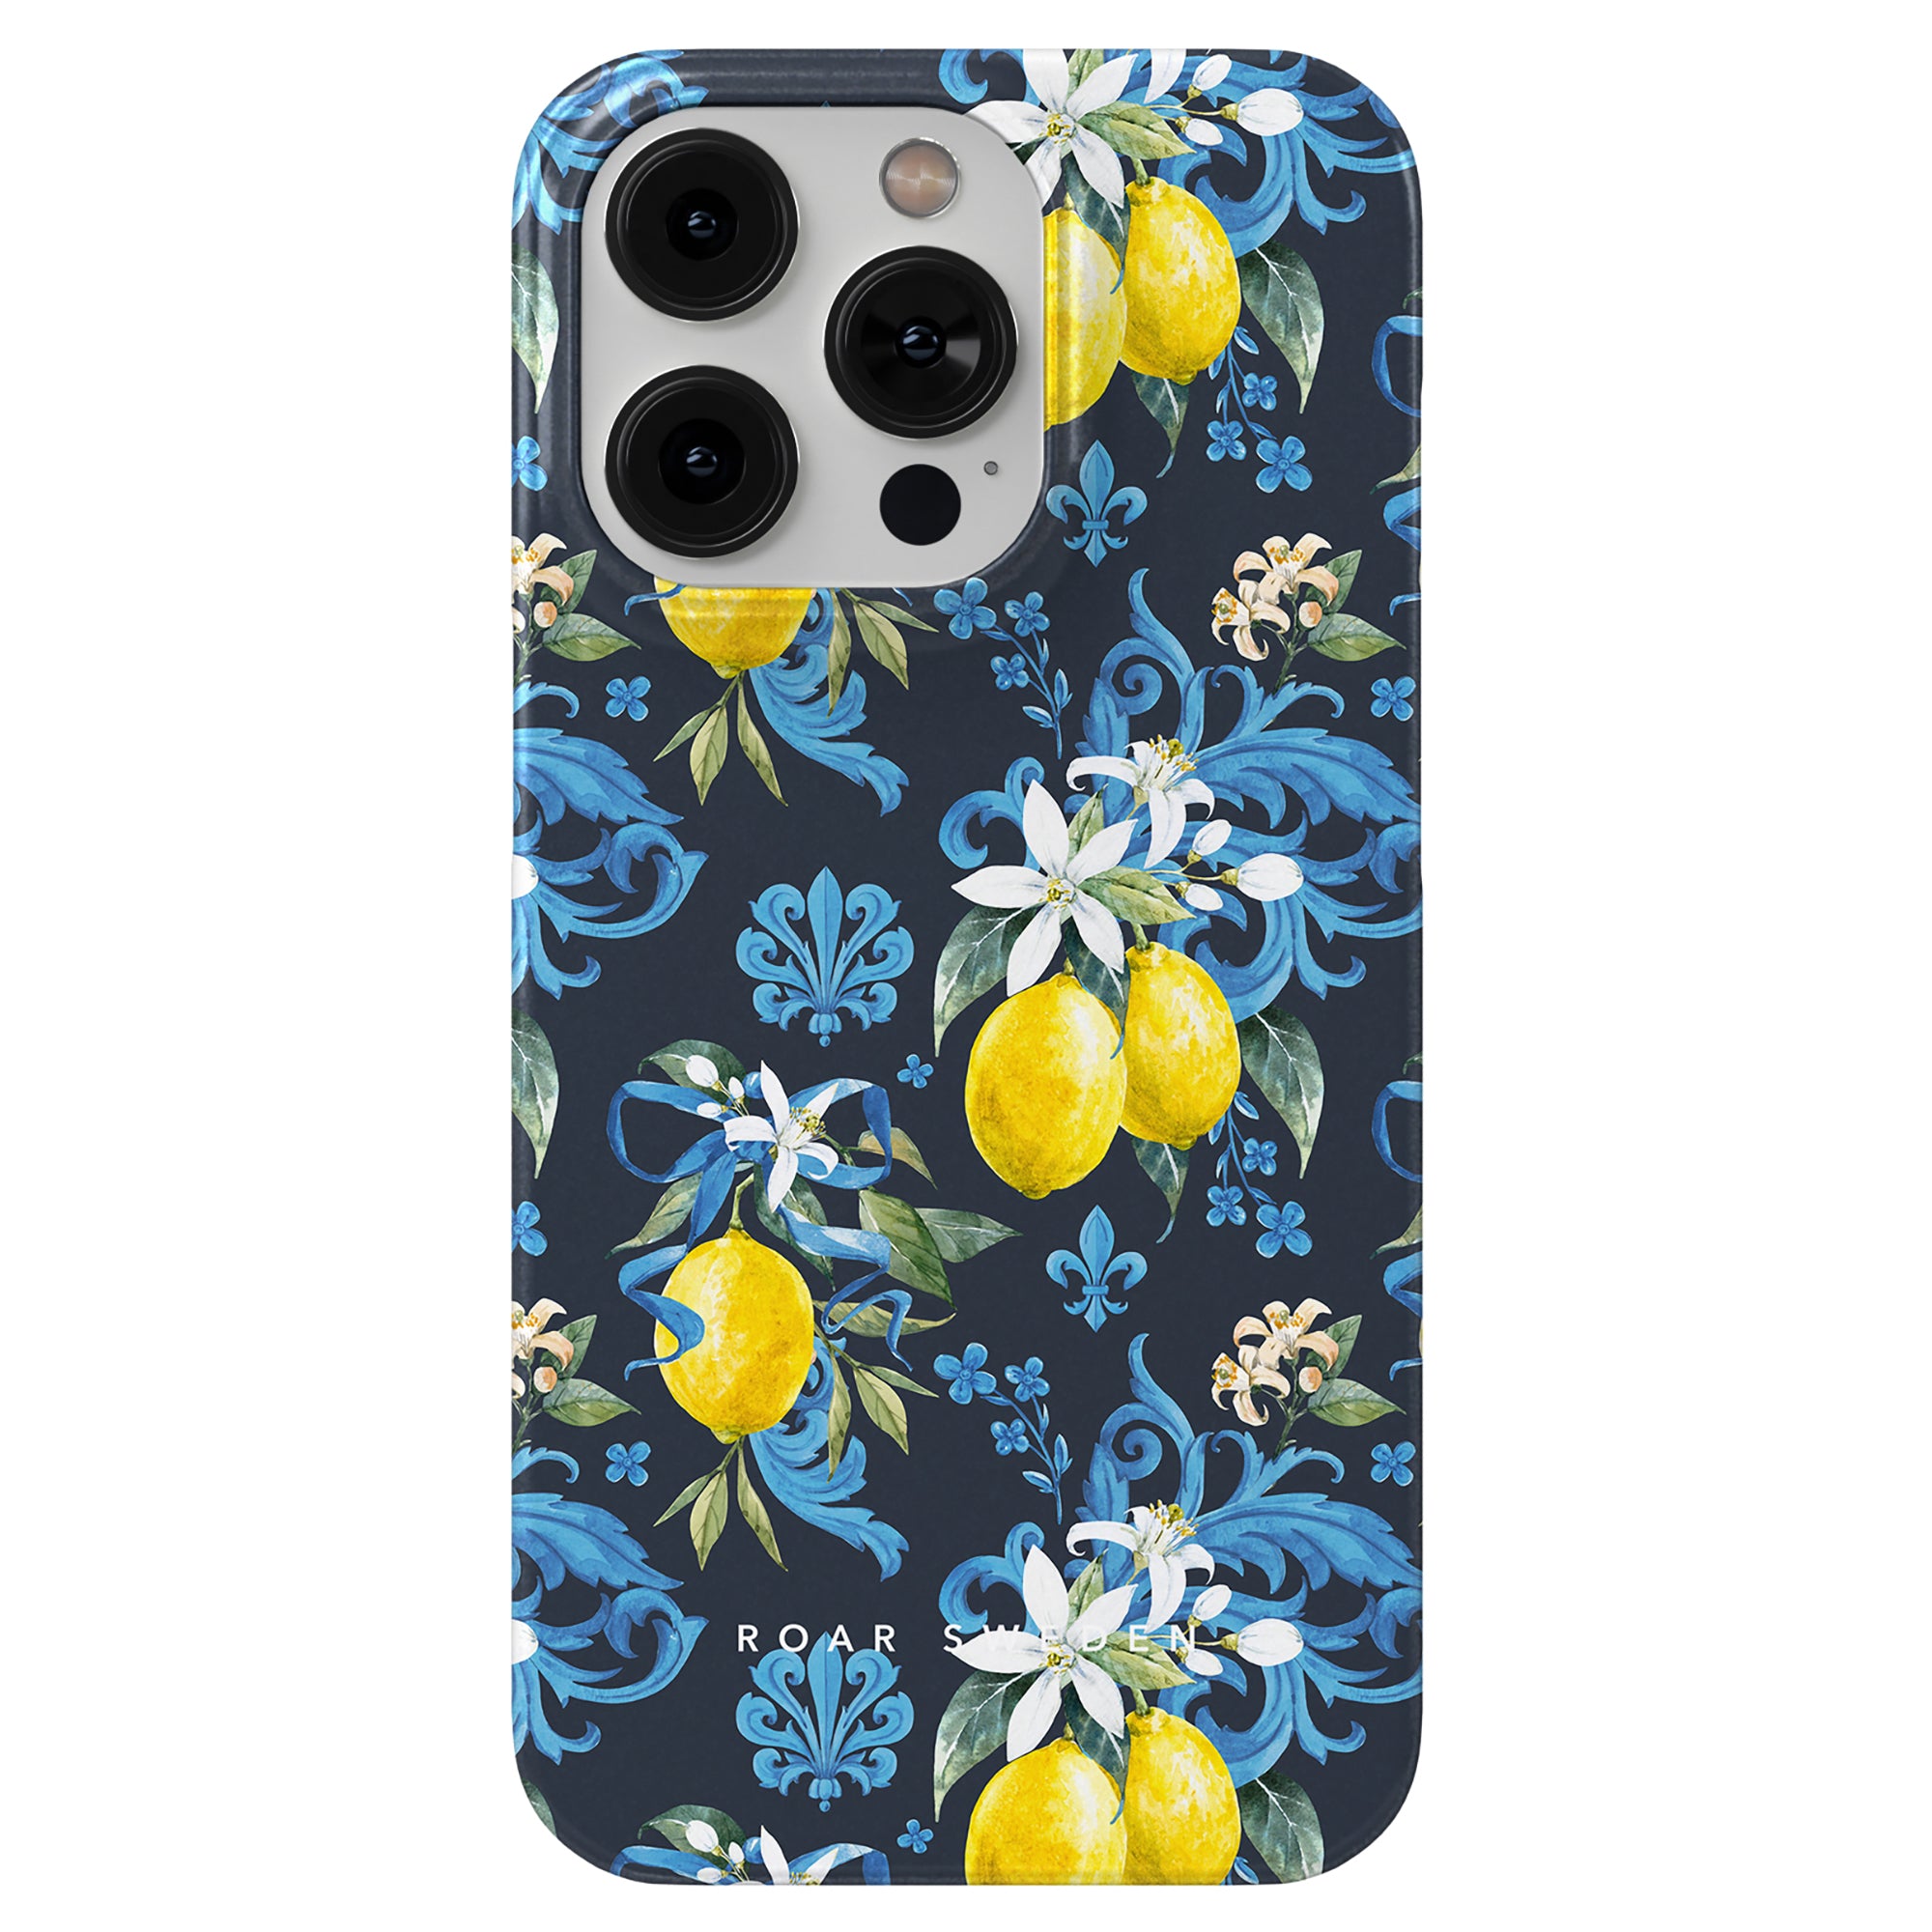 Toscana - Slim case with a lemon and floral pattern design inspired by Sicilien on a navy blue background.